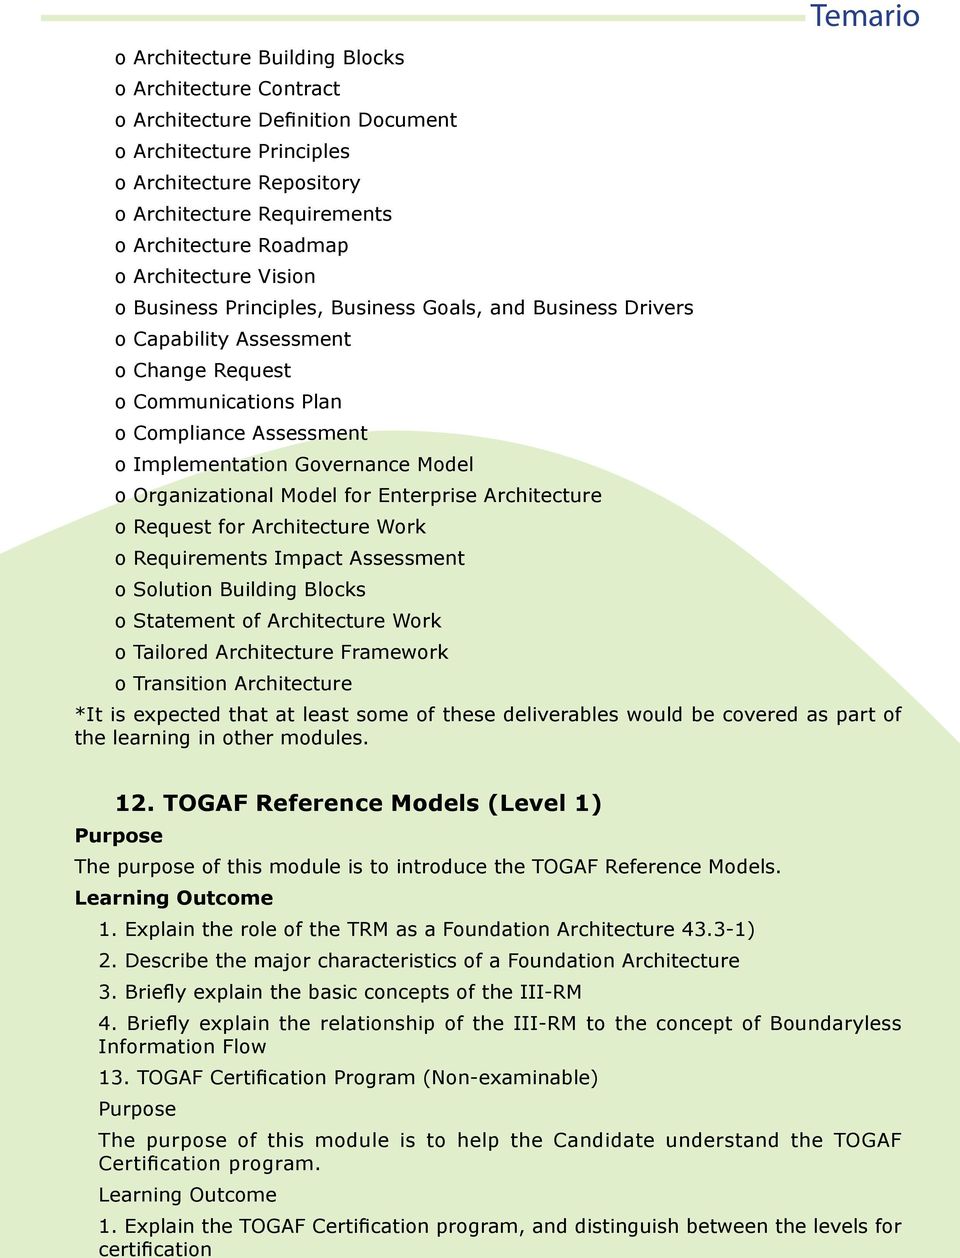 Model o Organizational Model for Enterprise Architecture o Request for Architecture Work o Requirements Impact Assessment o Solution Building Blocks o Statement of Architecture Work o Tailored